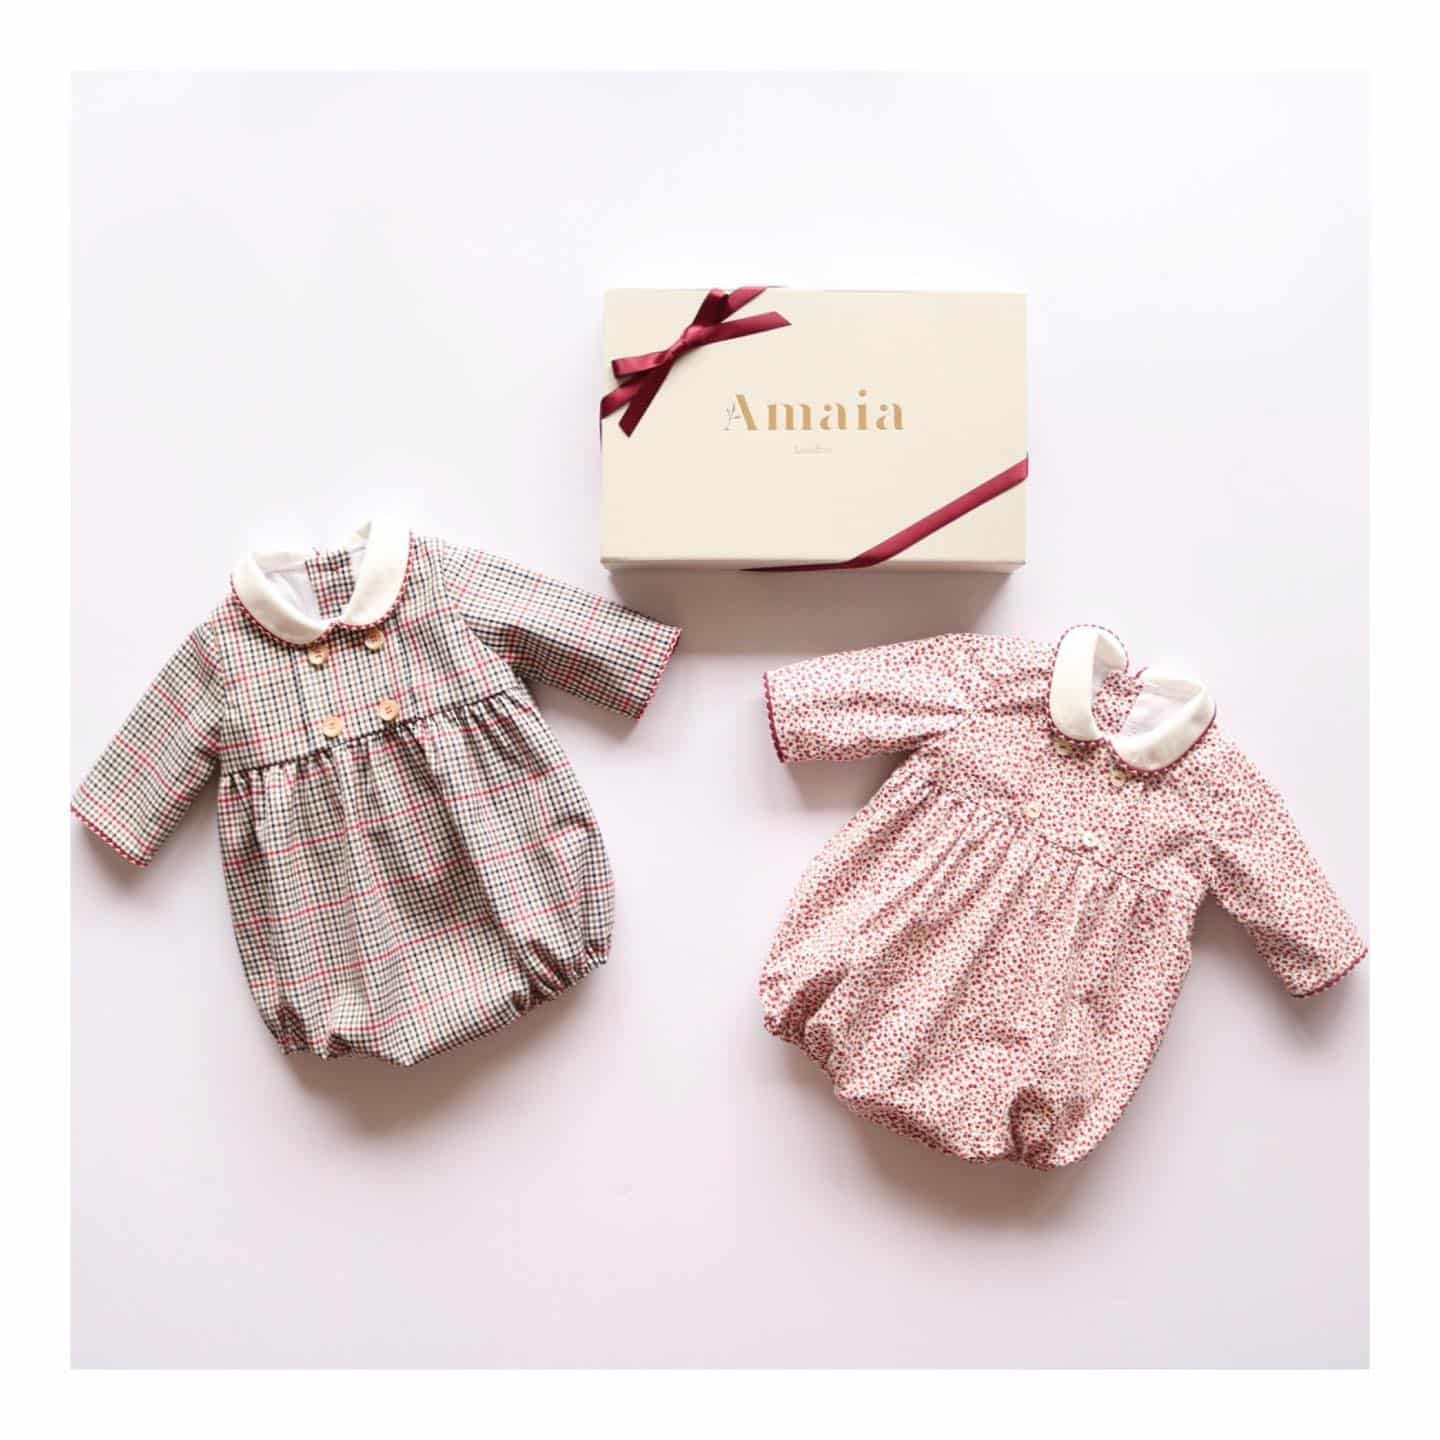 Amaia Kids ♥Welcome Amaia Kids AW20 collection!﻿﻿アマイアキッズ秋冬20コレクションの販売を